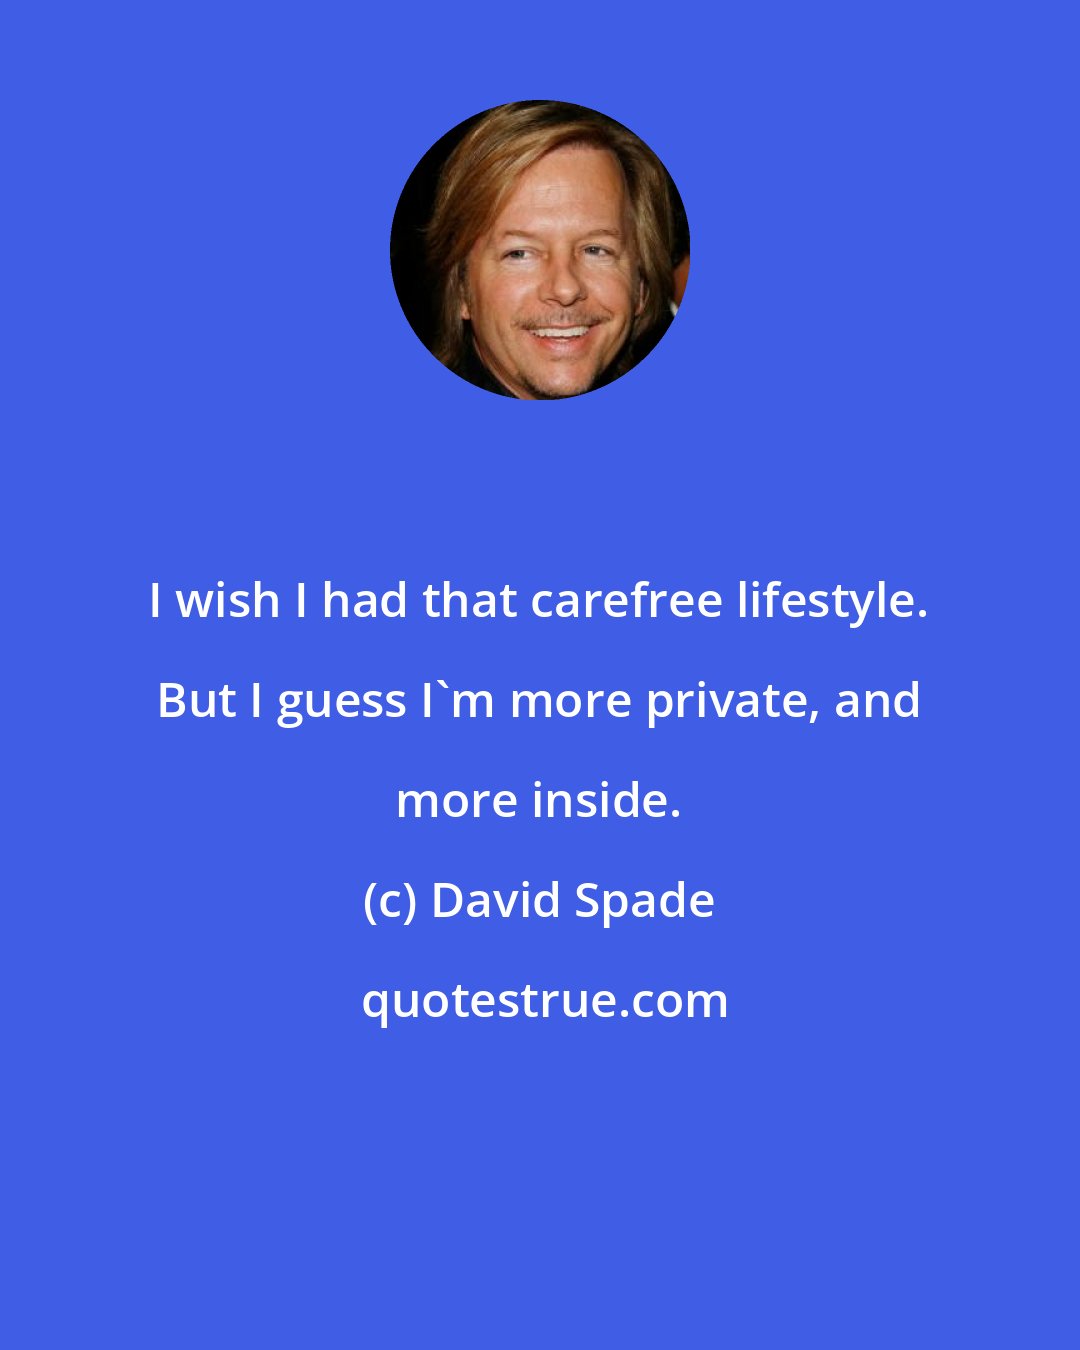 David Spade: I wish I had that carefree lifestyle. But I guess I'm more private, and more inside.